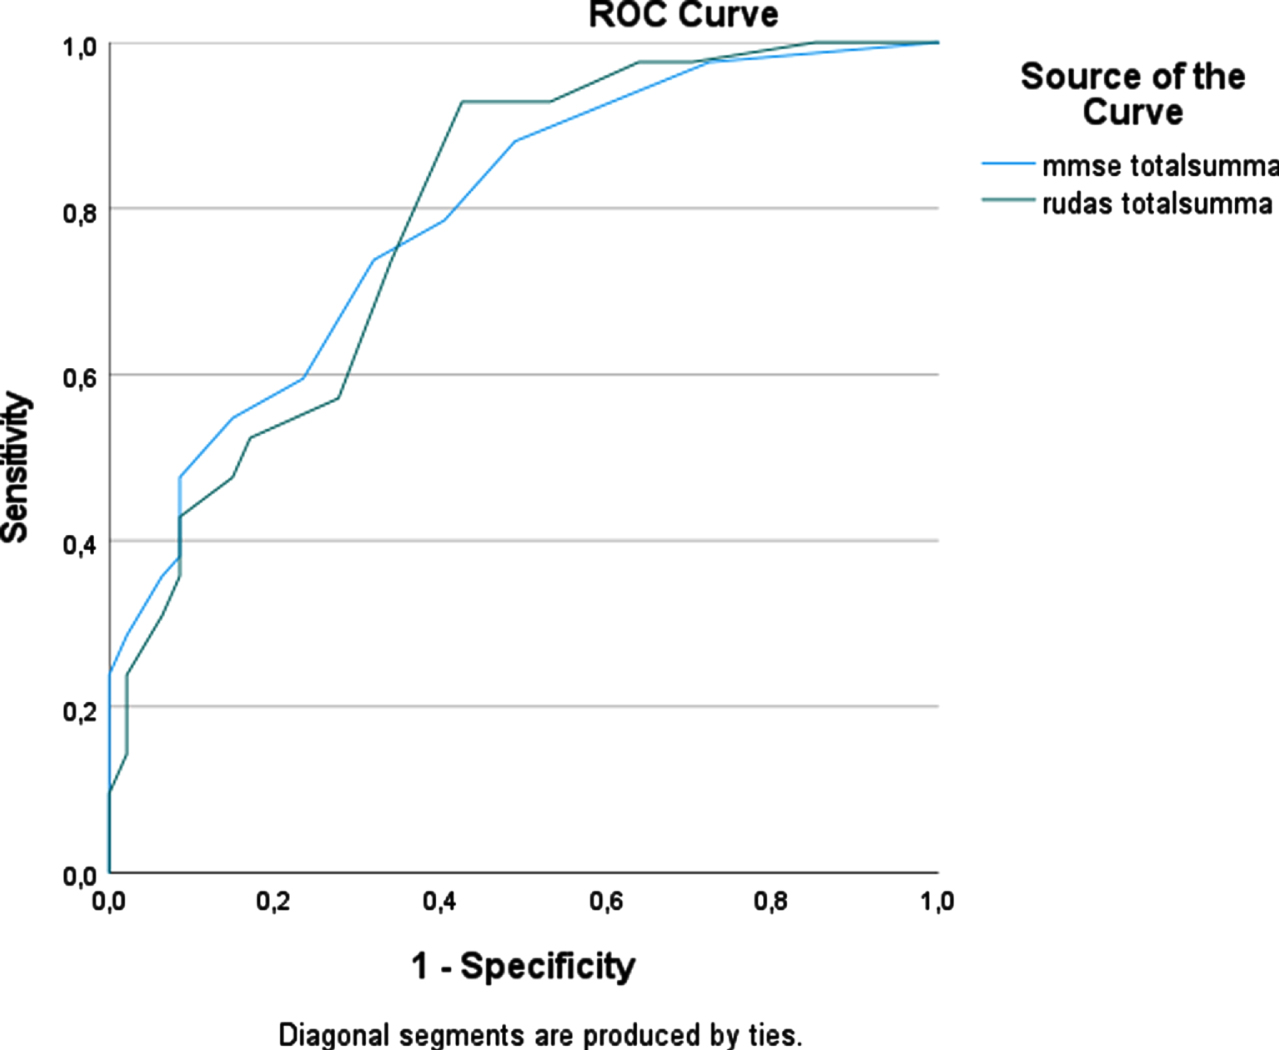 ROC curve for the RUDAS-S and the MMSE-SR for detecting dementia in the NS groups (n = 89).